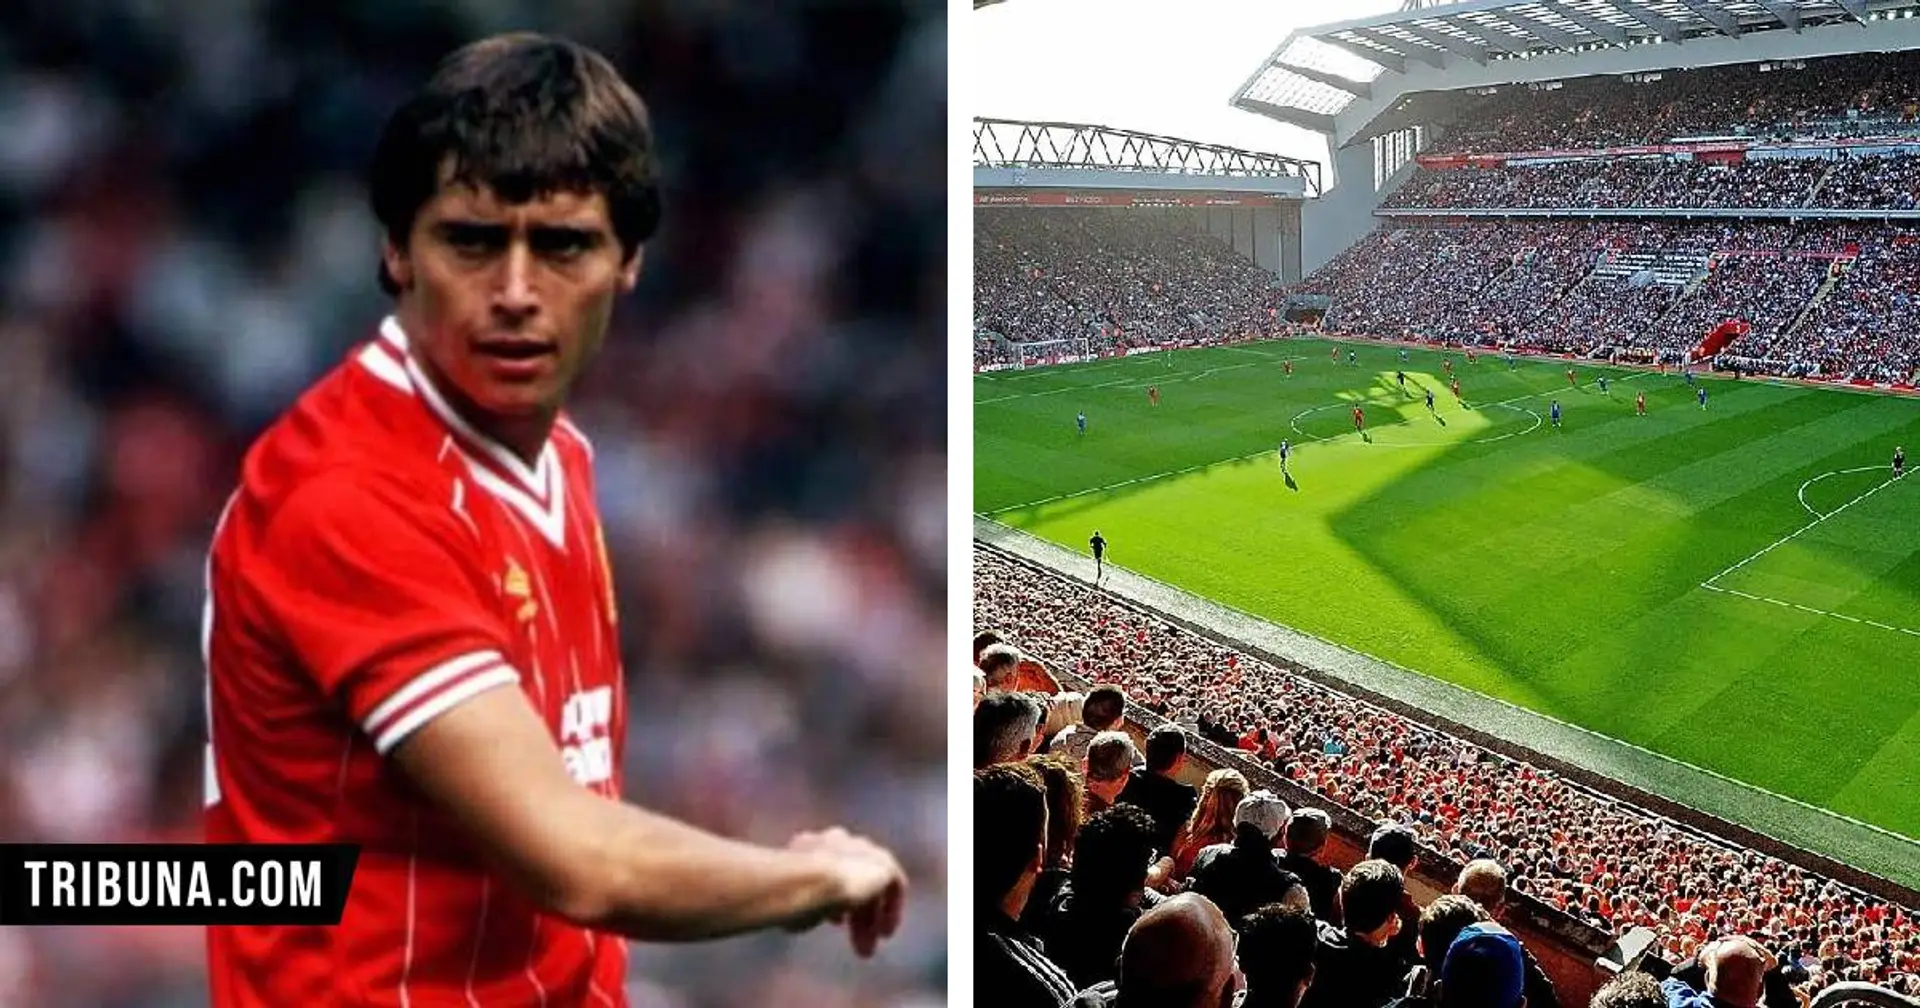 Liverpool set to face Osasuna in pre-season friendly in honour of former Red Michael Robinson, who passed away last year